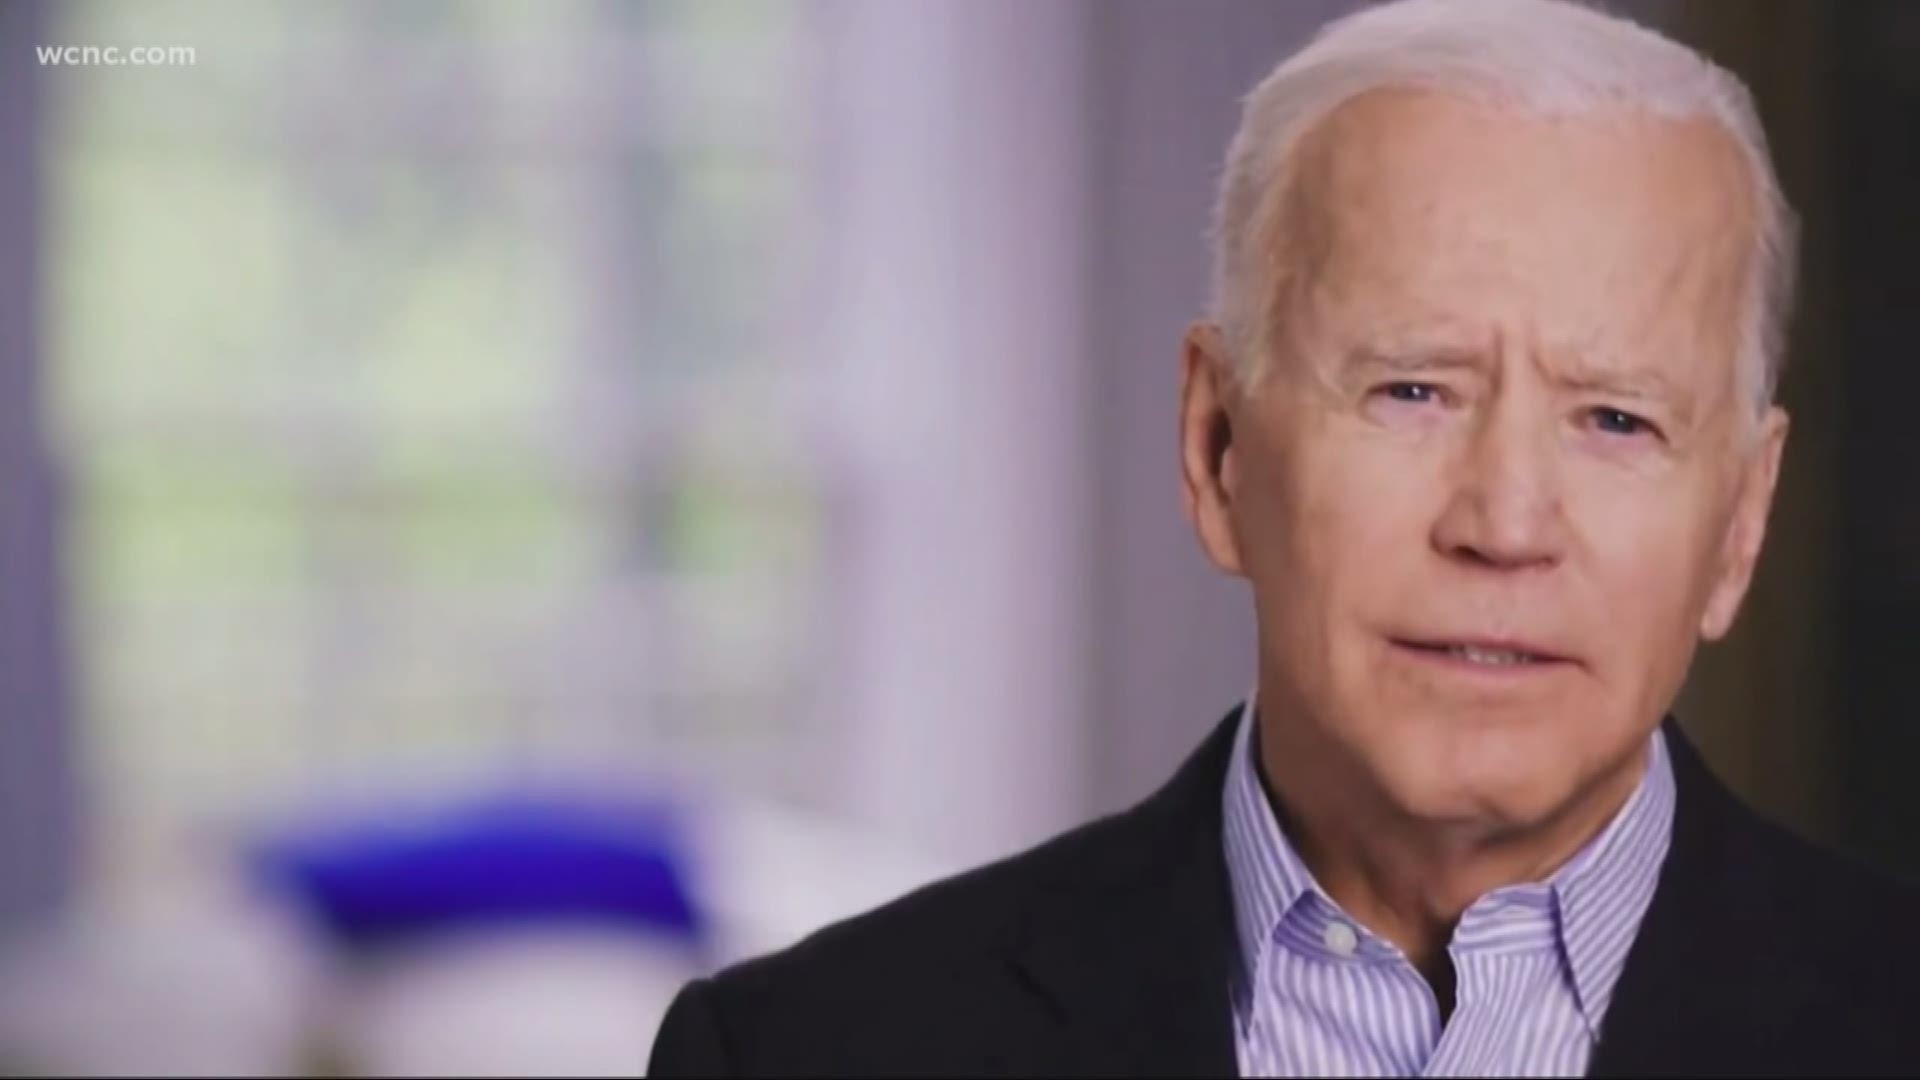 Former Vice President Joe Biden announced Thursday that he will run for president in 2020, joining a crowded Democratic field.